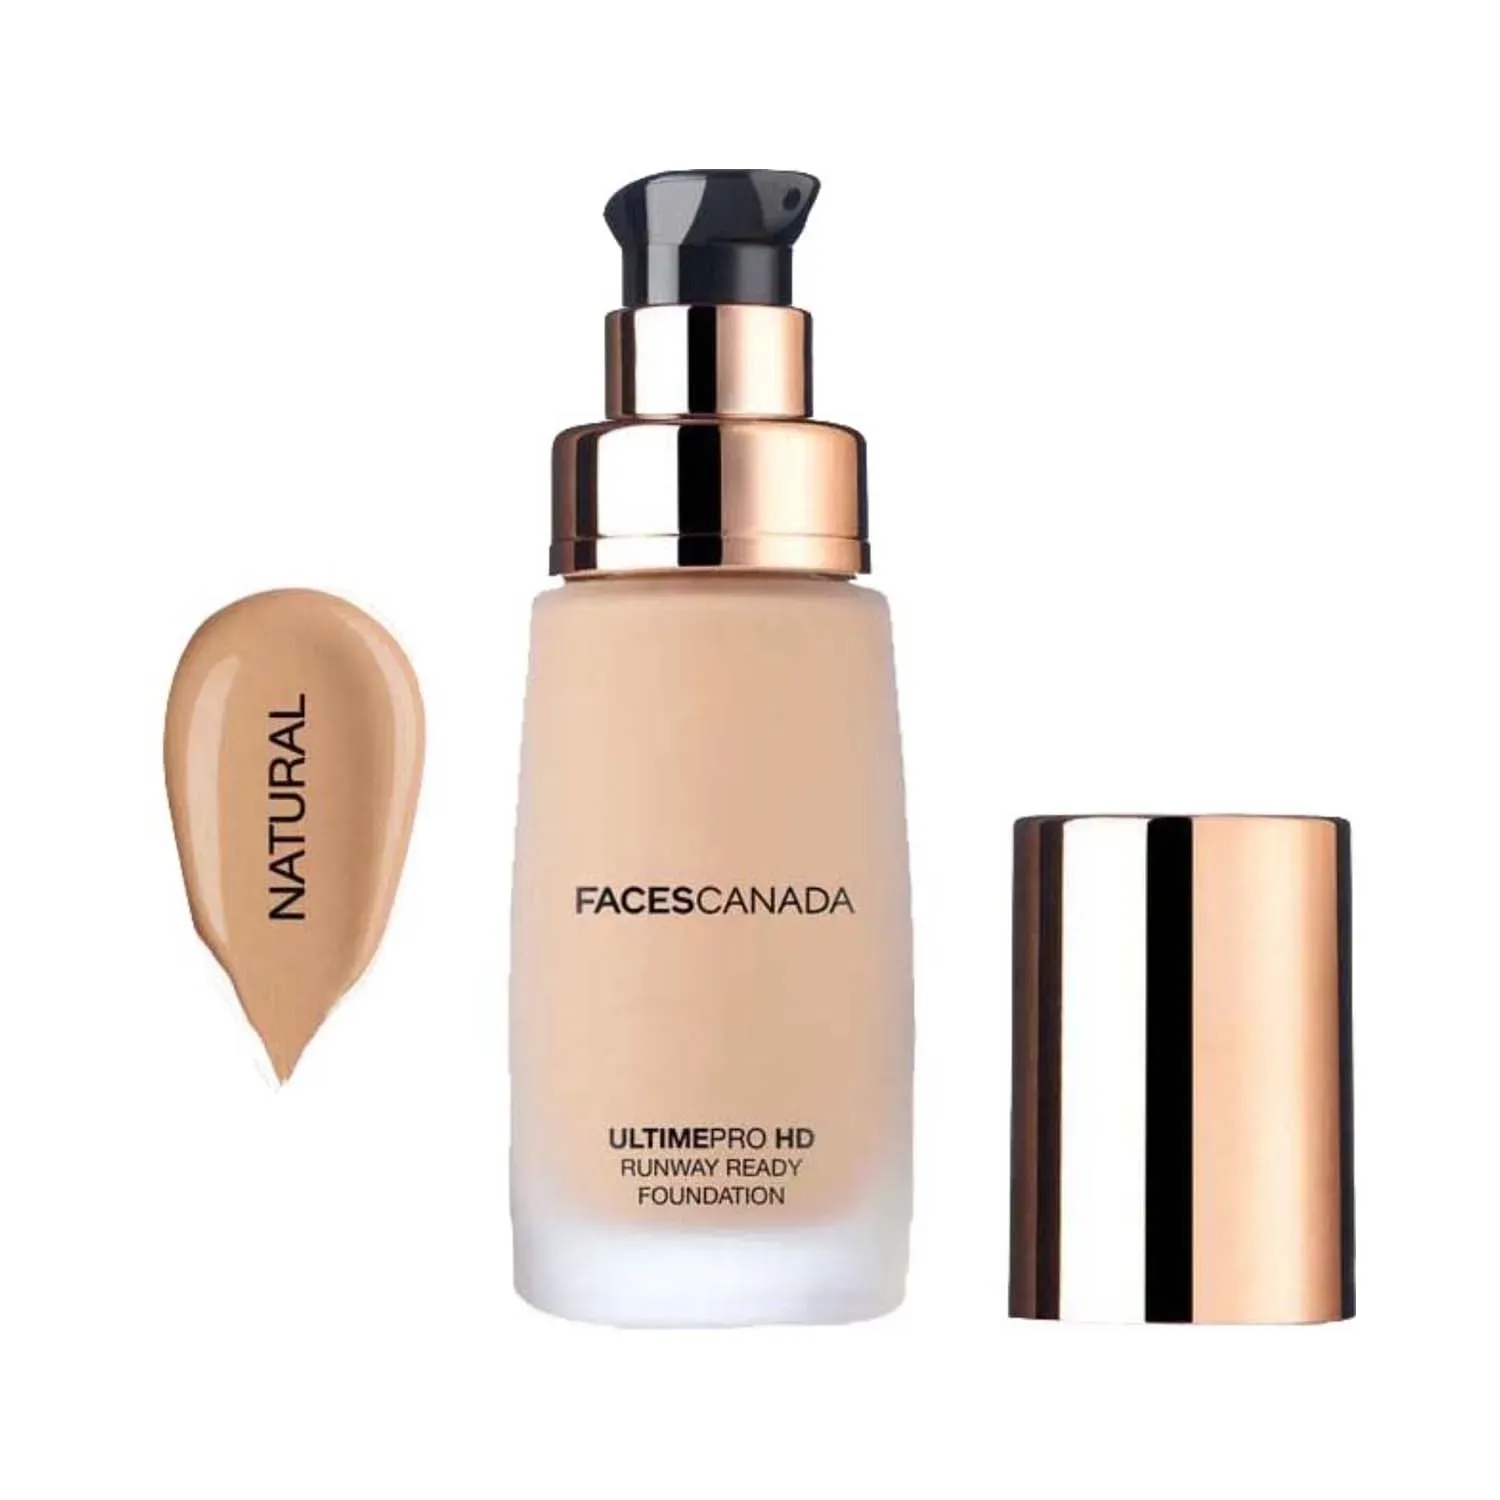 Faces Canada | Faces Canada Ultime Pro HD Runway Ready Foundation - 02 Natural (30ml)